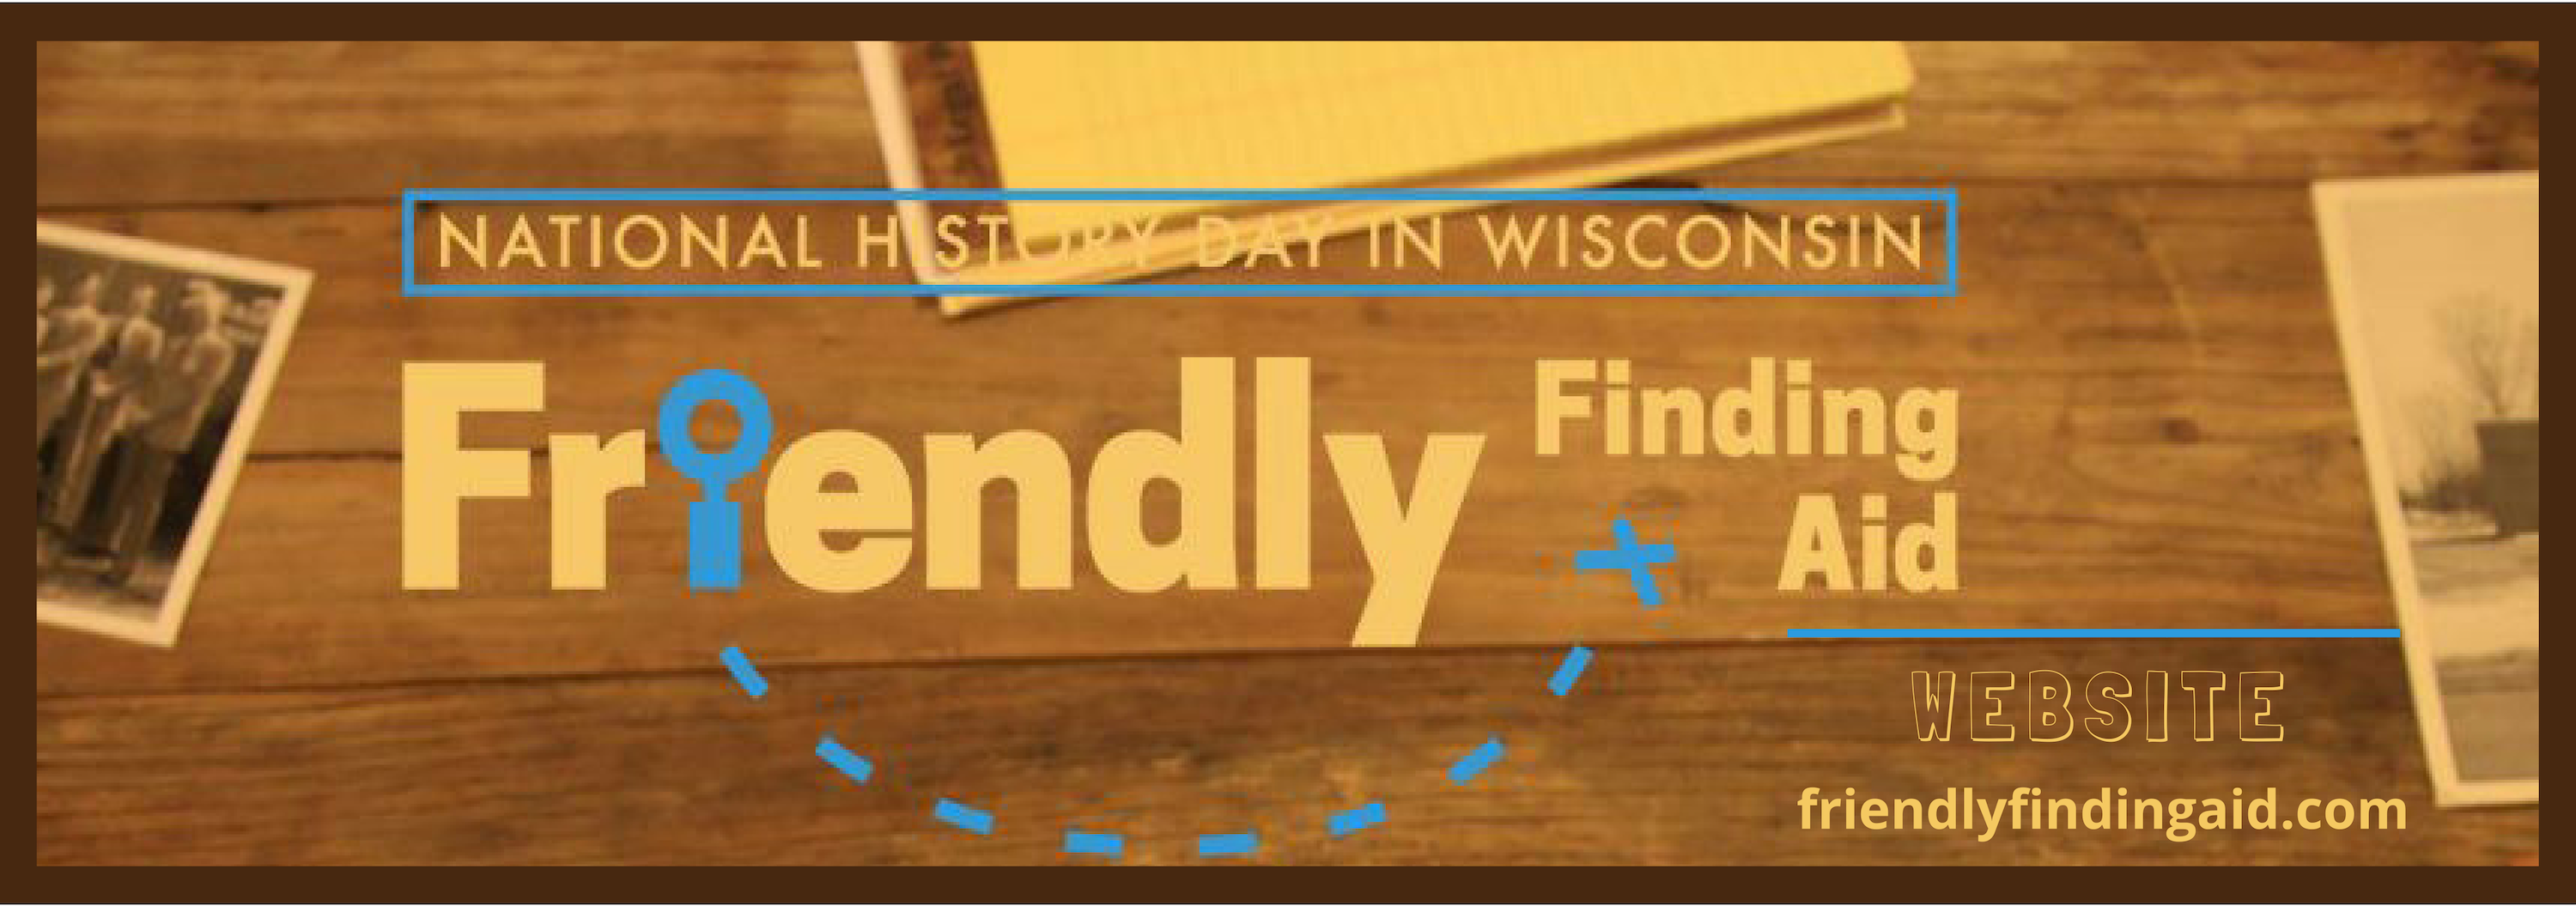 Friendly Finding Aid logo and website url